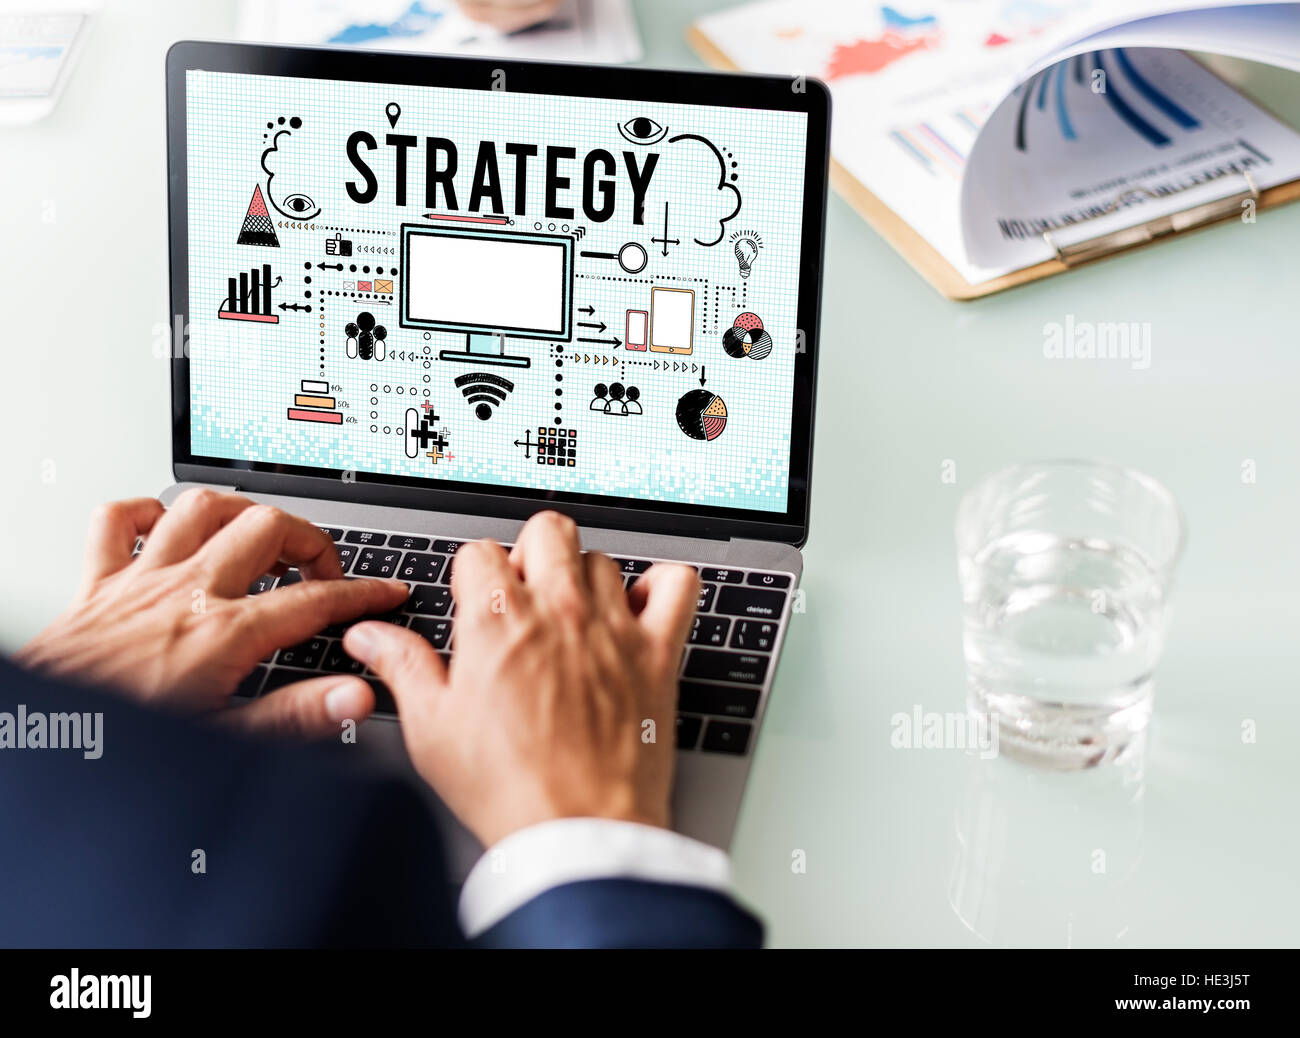 Branding Business Marketing Strategy Concept Stock Photo